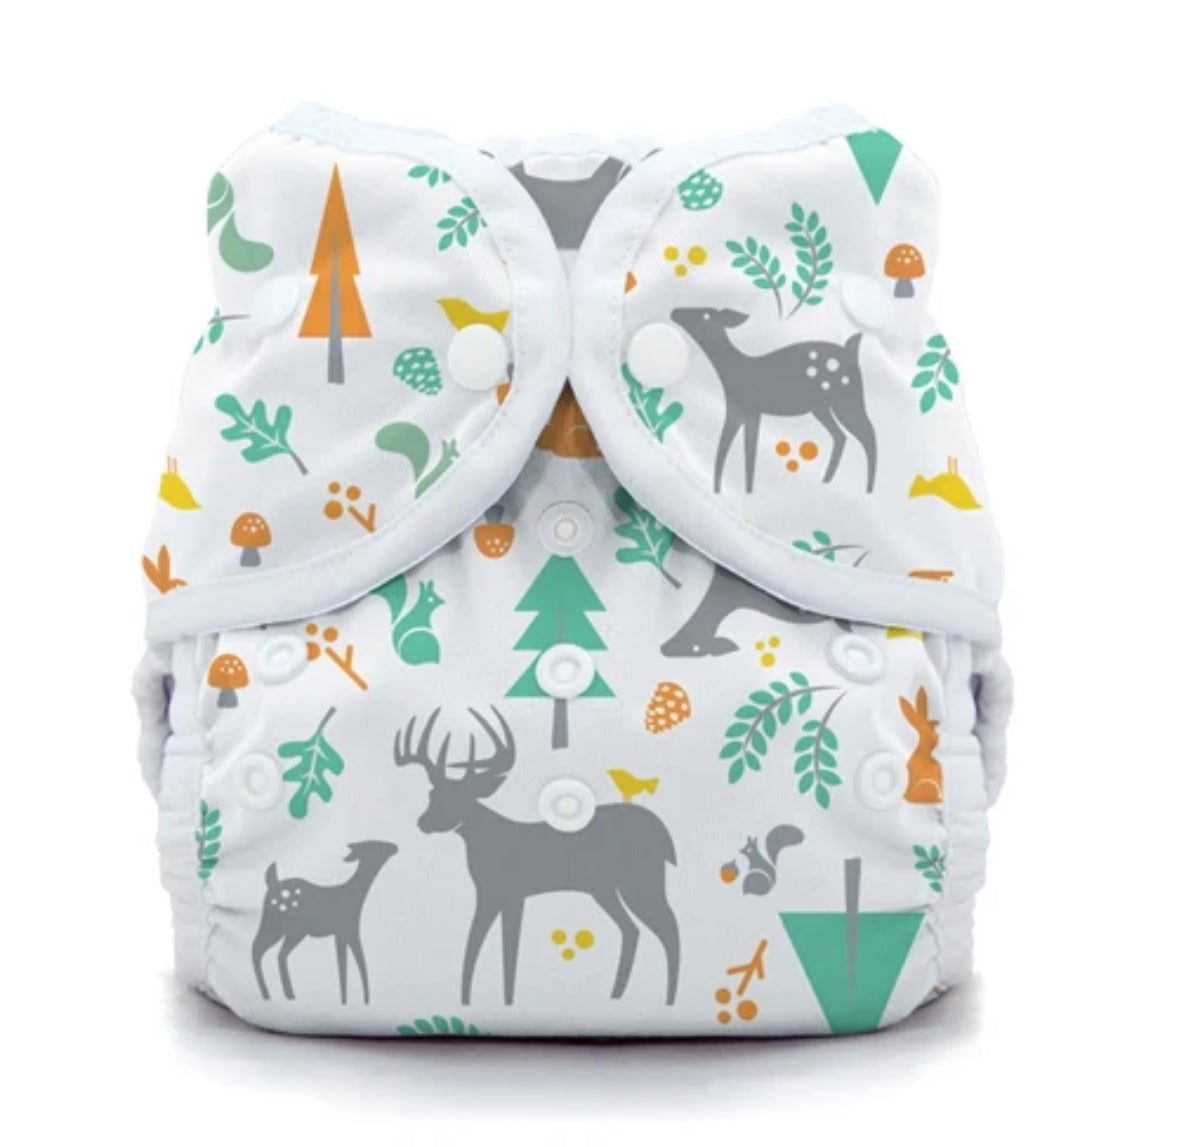 Thirsties Duo Wrap Reusable Cloth Diaper Cover Size Two (18-40lbs) - Woodland